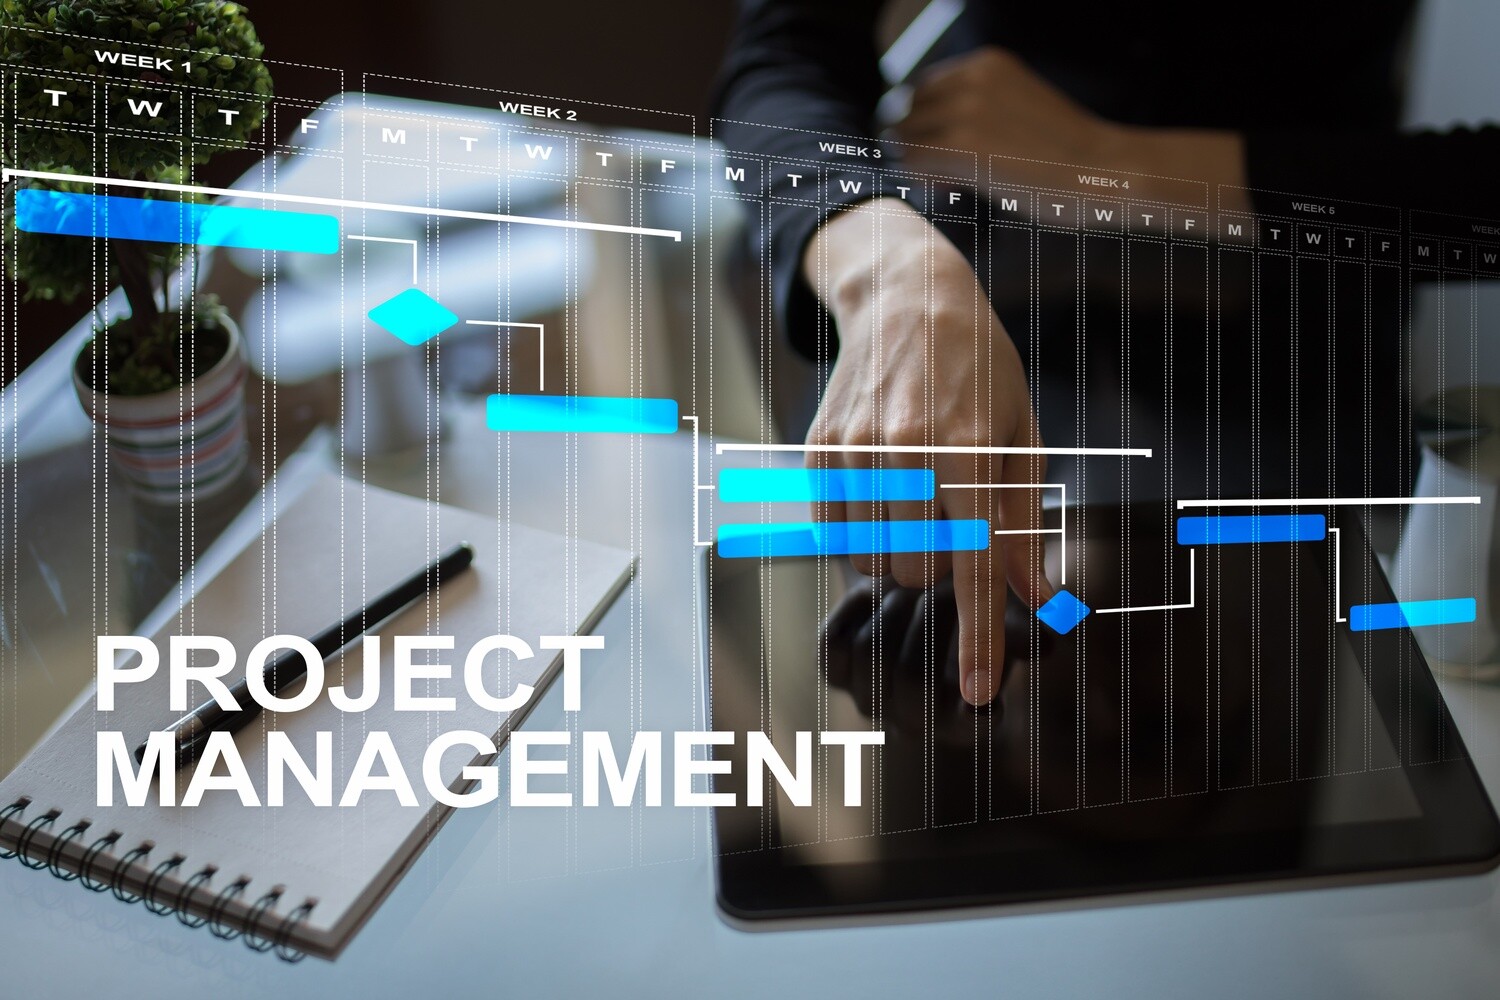 Project Management Principles Using Microsoft Project (3 days, 21 PDUs)